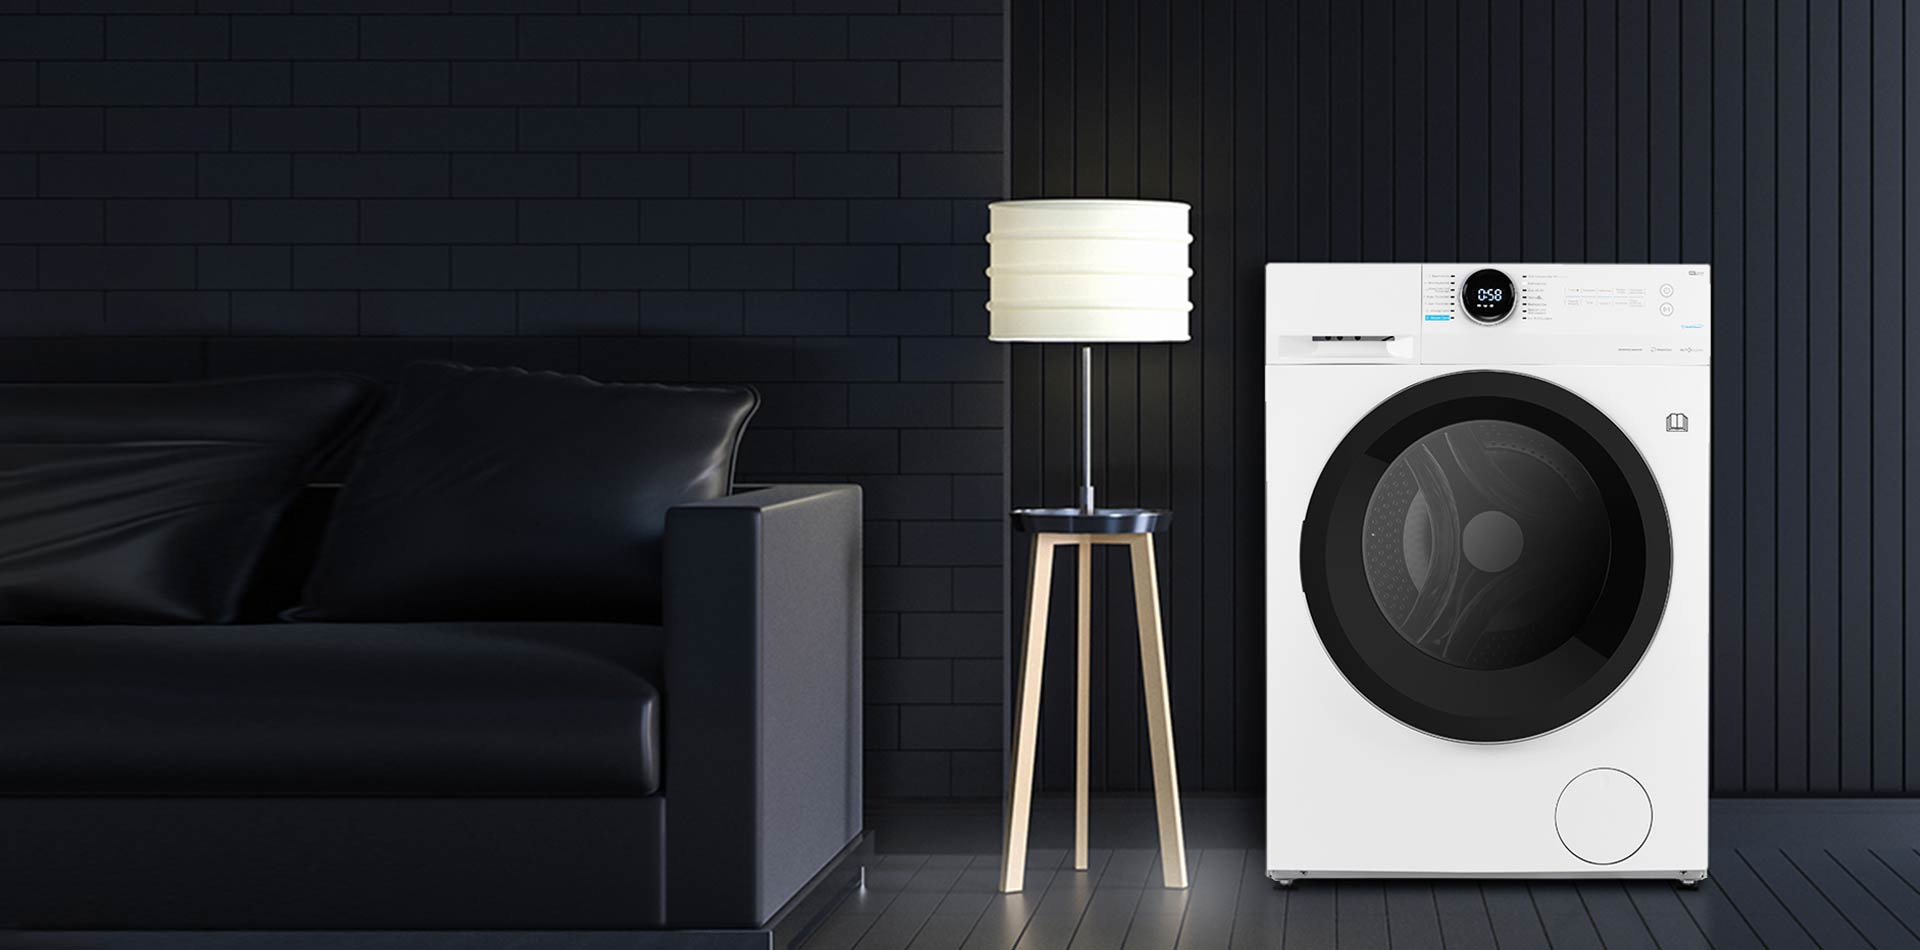 Coolwasher Washing Machine Makes You a Better Life